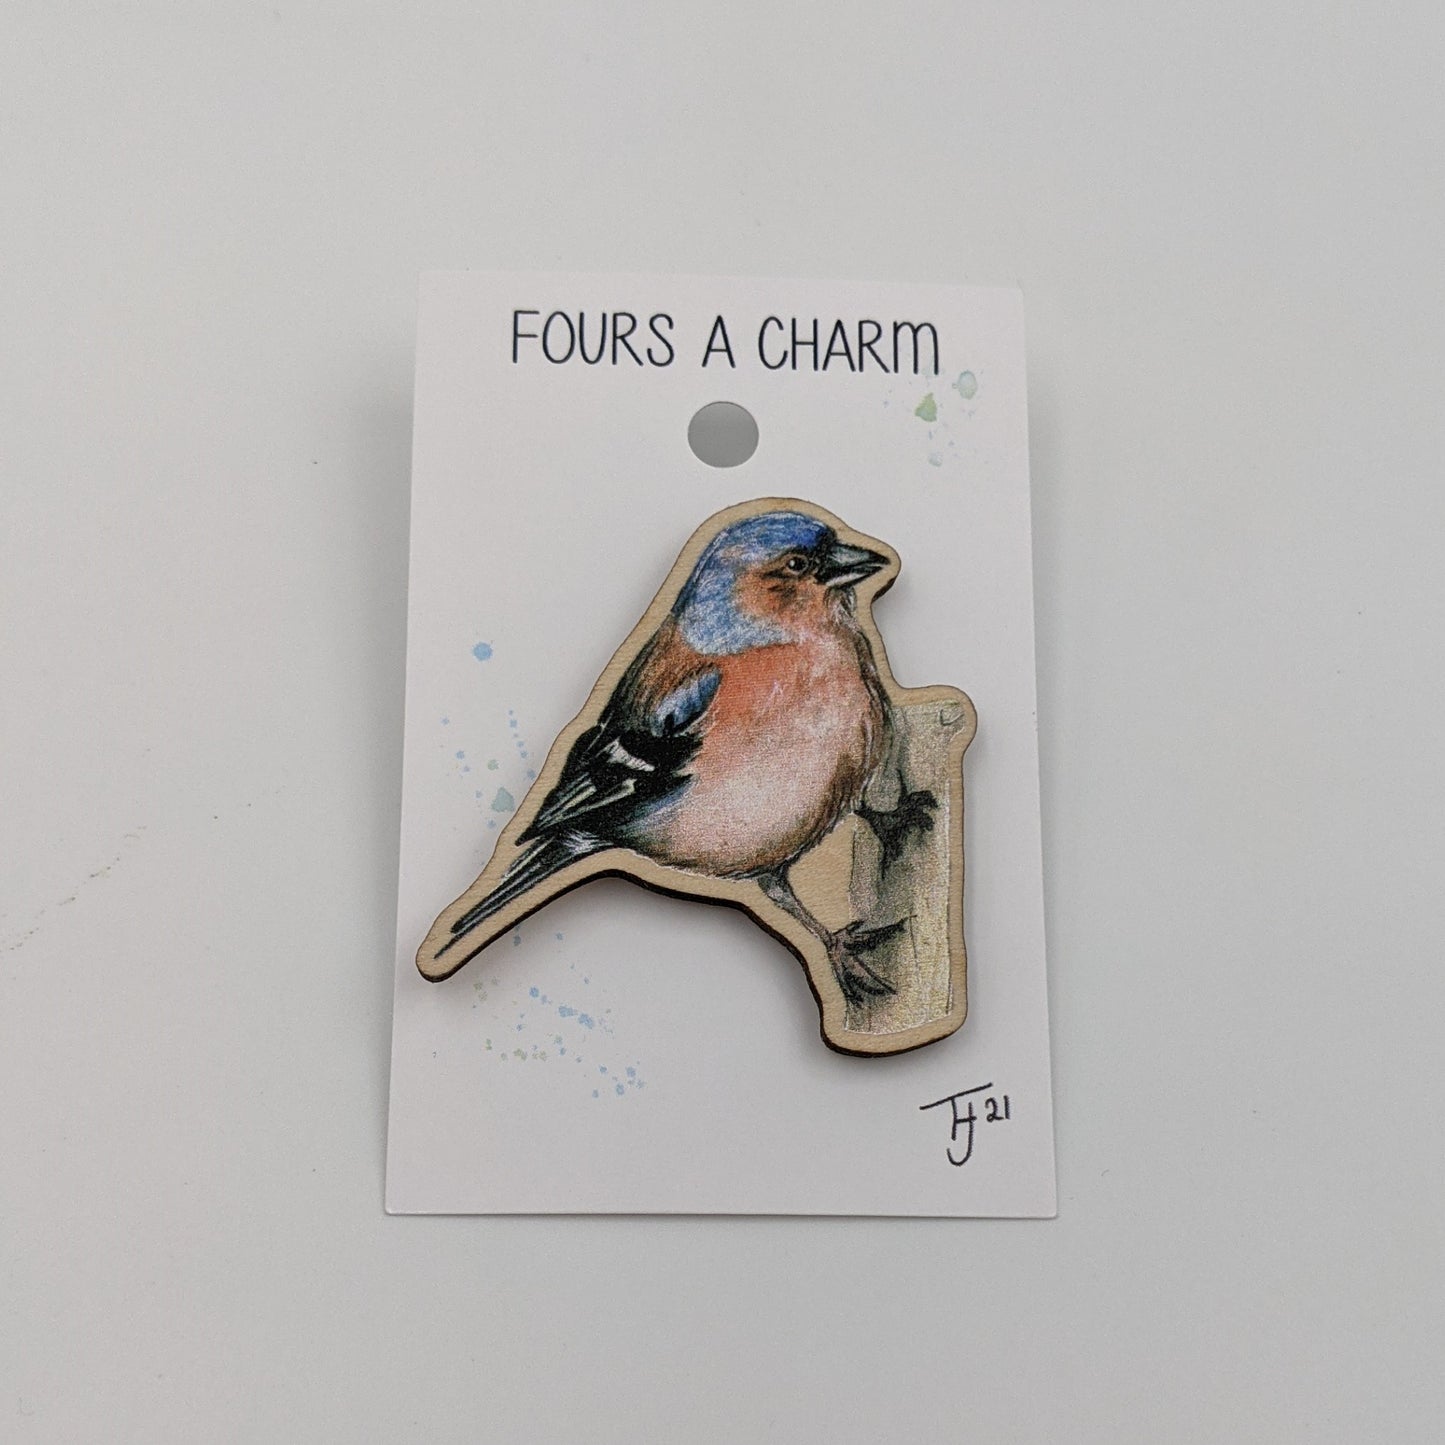 "Fours A Charm" Chaffinch Pin